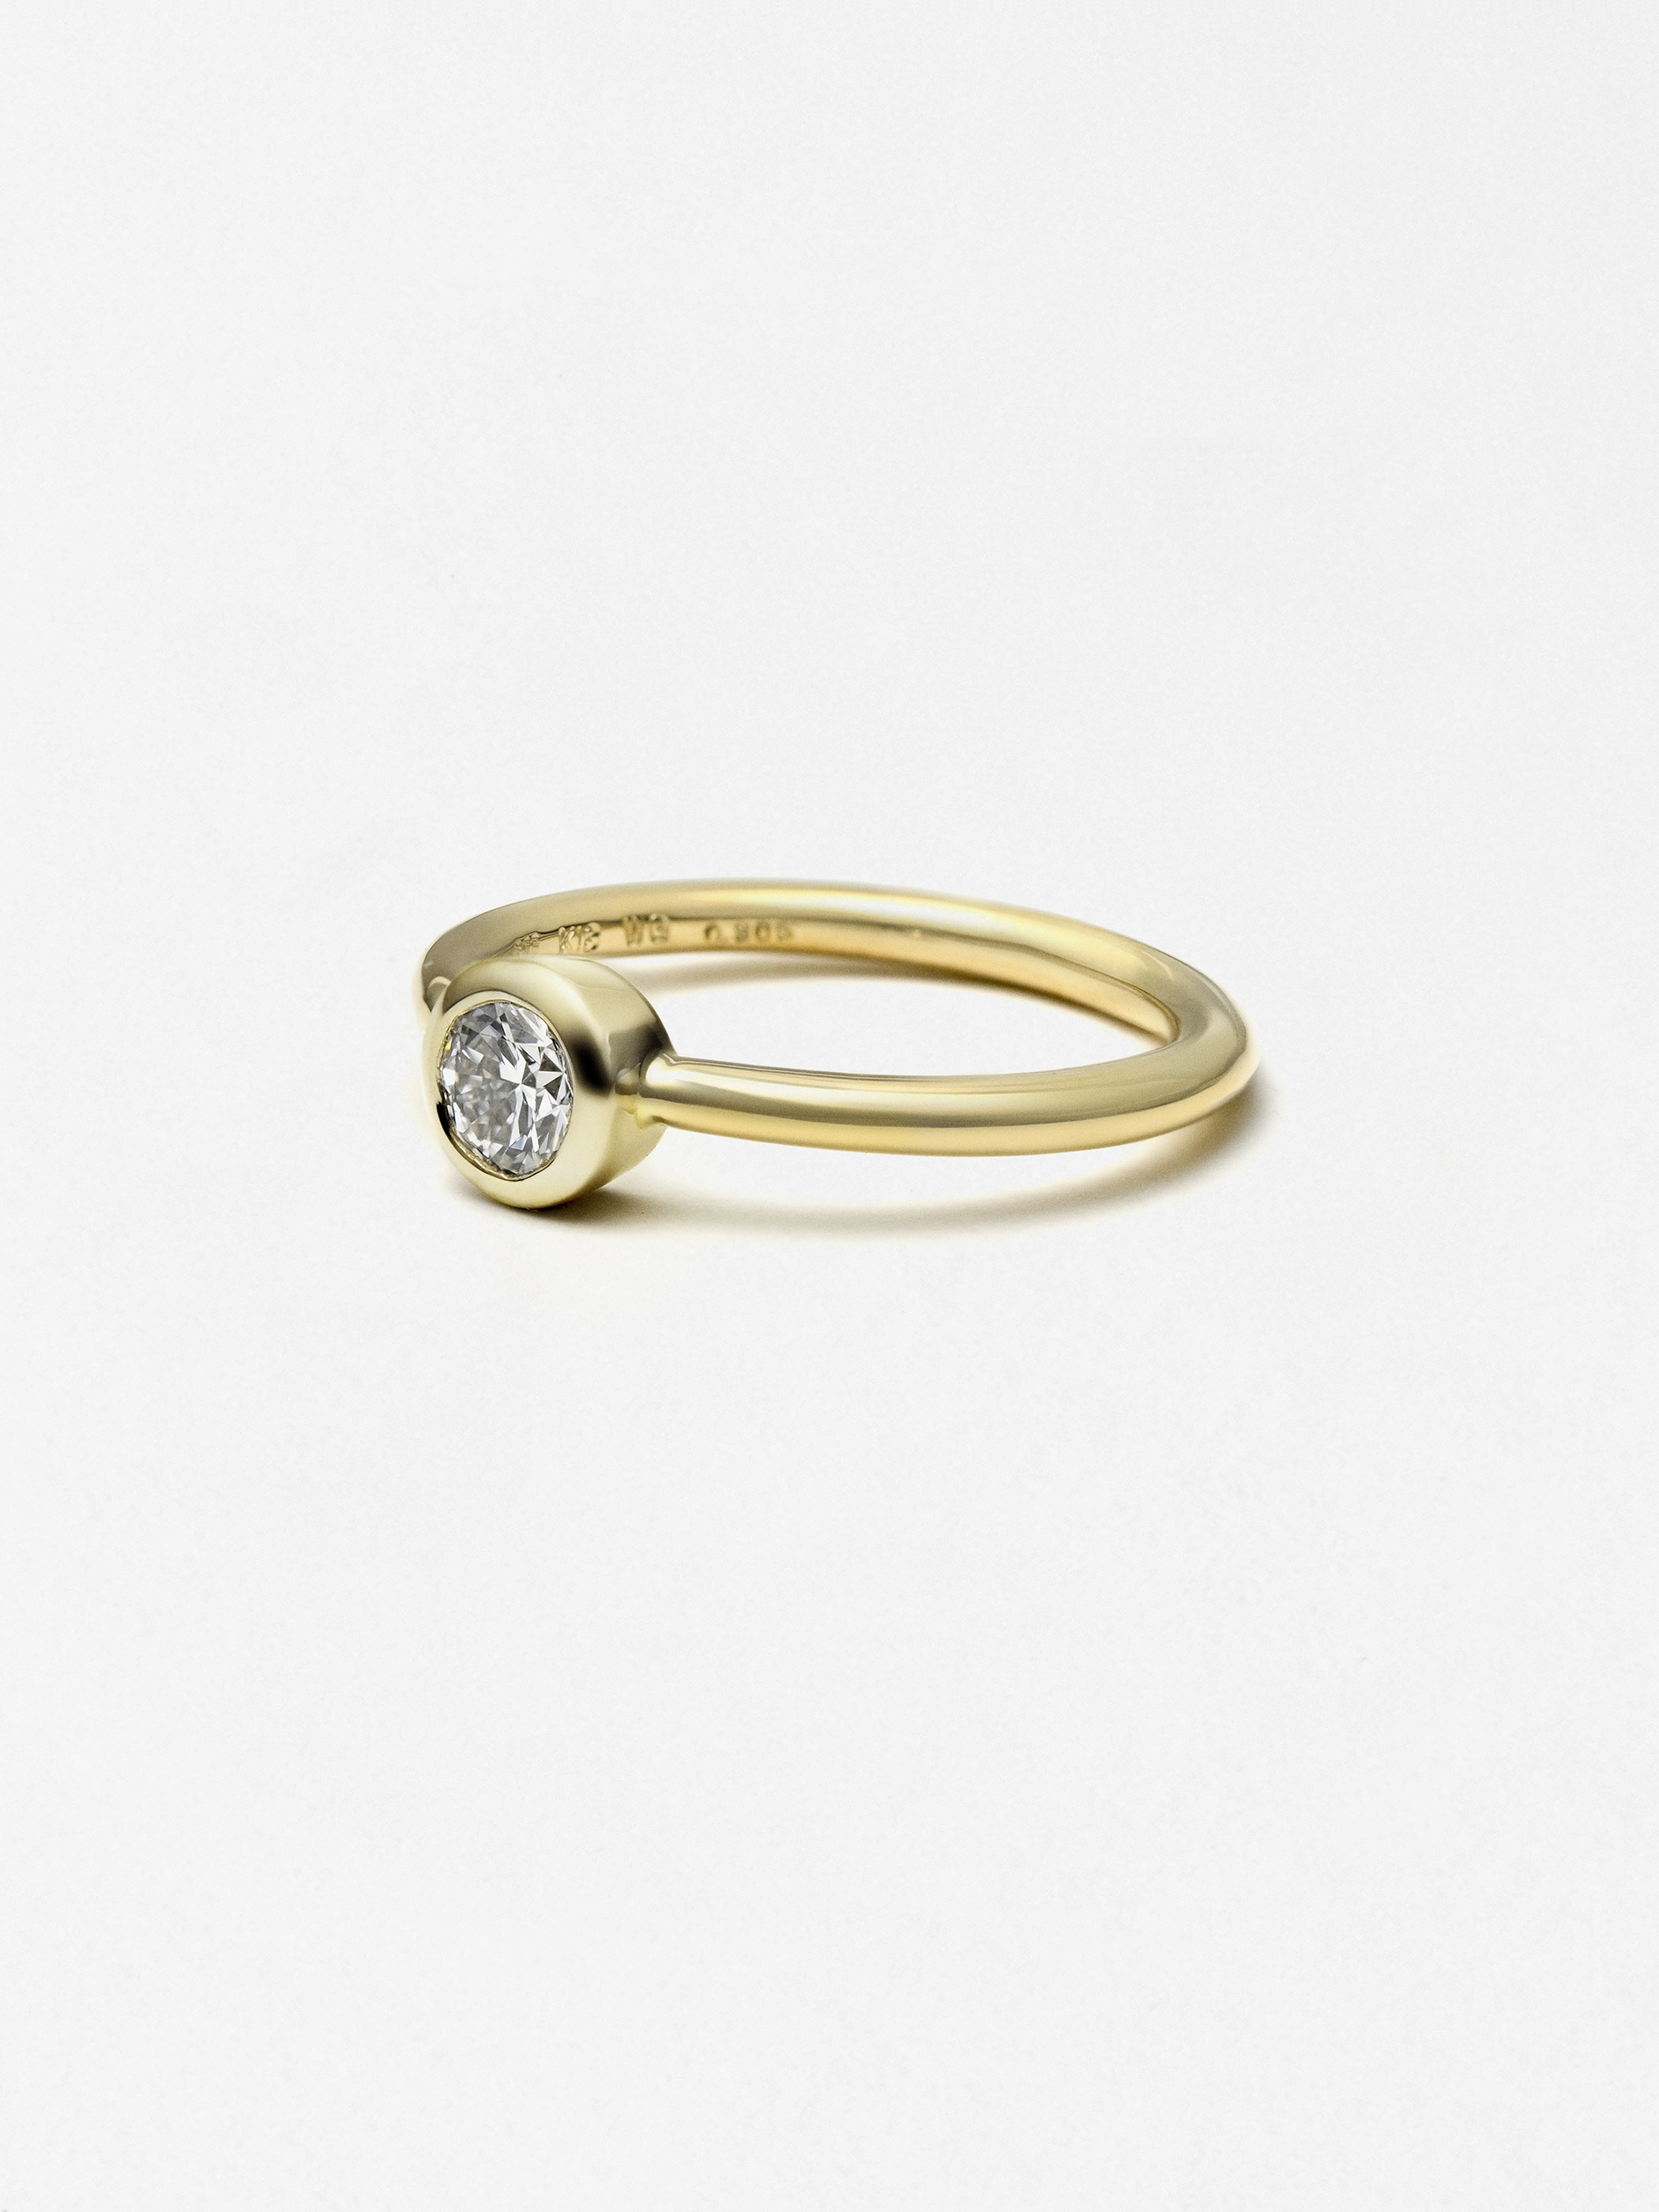 DIAMOND RING SOLITAIRE YG 0.3ct